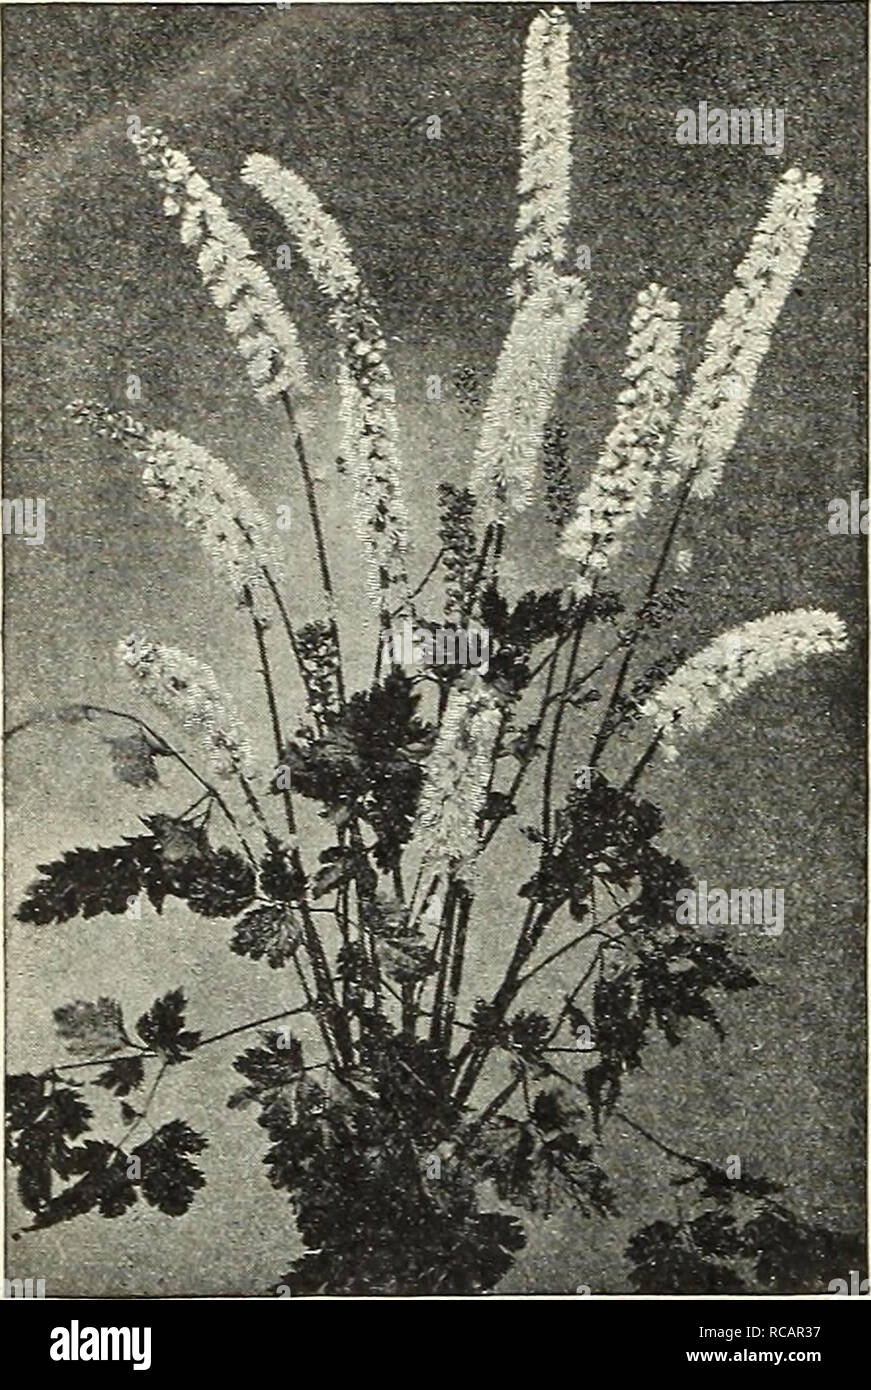 . Dreer's autumn catalogue 1905. Bulbs (Plants) Catalogs; Flowers Seeds Catalogs; Gardening Equipment and supplies Catalogs; Nurseries (Horticulture) Catalogs; Fruit Seeds Catalogs; Vegetables Seeds Catalogs. 40 Henry A. Preer, Philadelphia, Pa.. CiMiciFUGA Simplex. Ciinicifusa R:ice nosa (Snake-rooi). Long spikes of pure white flowers in July: 6 ft. 2.5 cts. each : .$2.50 per doz. Acerinum, or Japnniciiru. White flowers: August and September; 2V ft. 25 cts. each; S2.50 per doz. Dahurica. A handsome species; creamy-white flowers: August and September. 25 cts. each ; $2.50 per doz. Simplex. Val Stock Photo